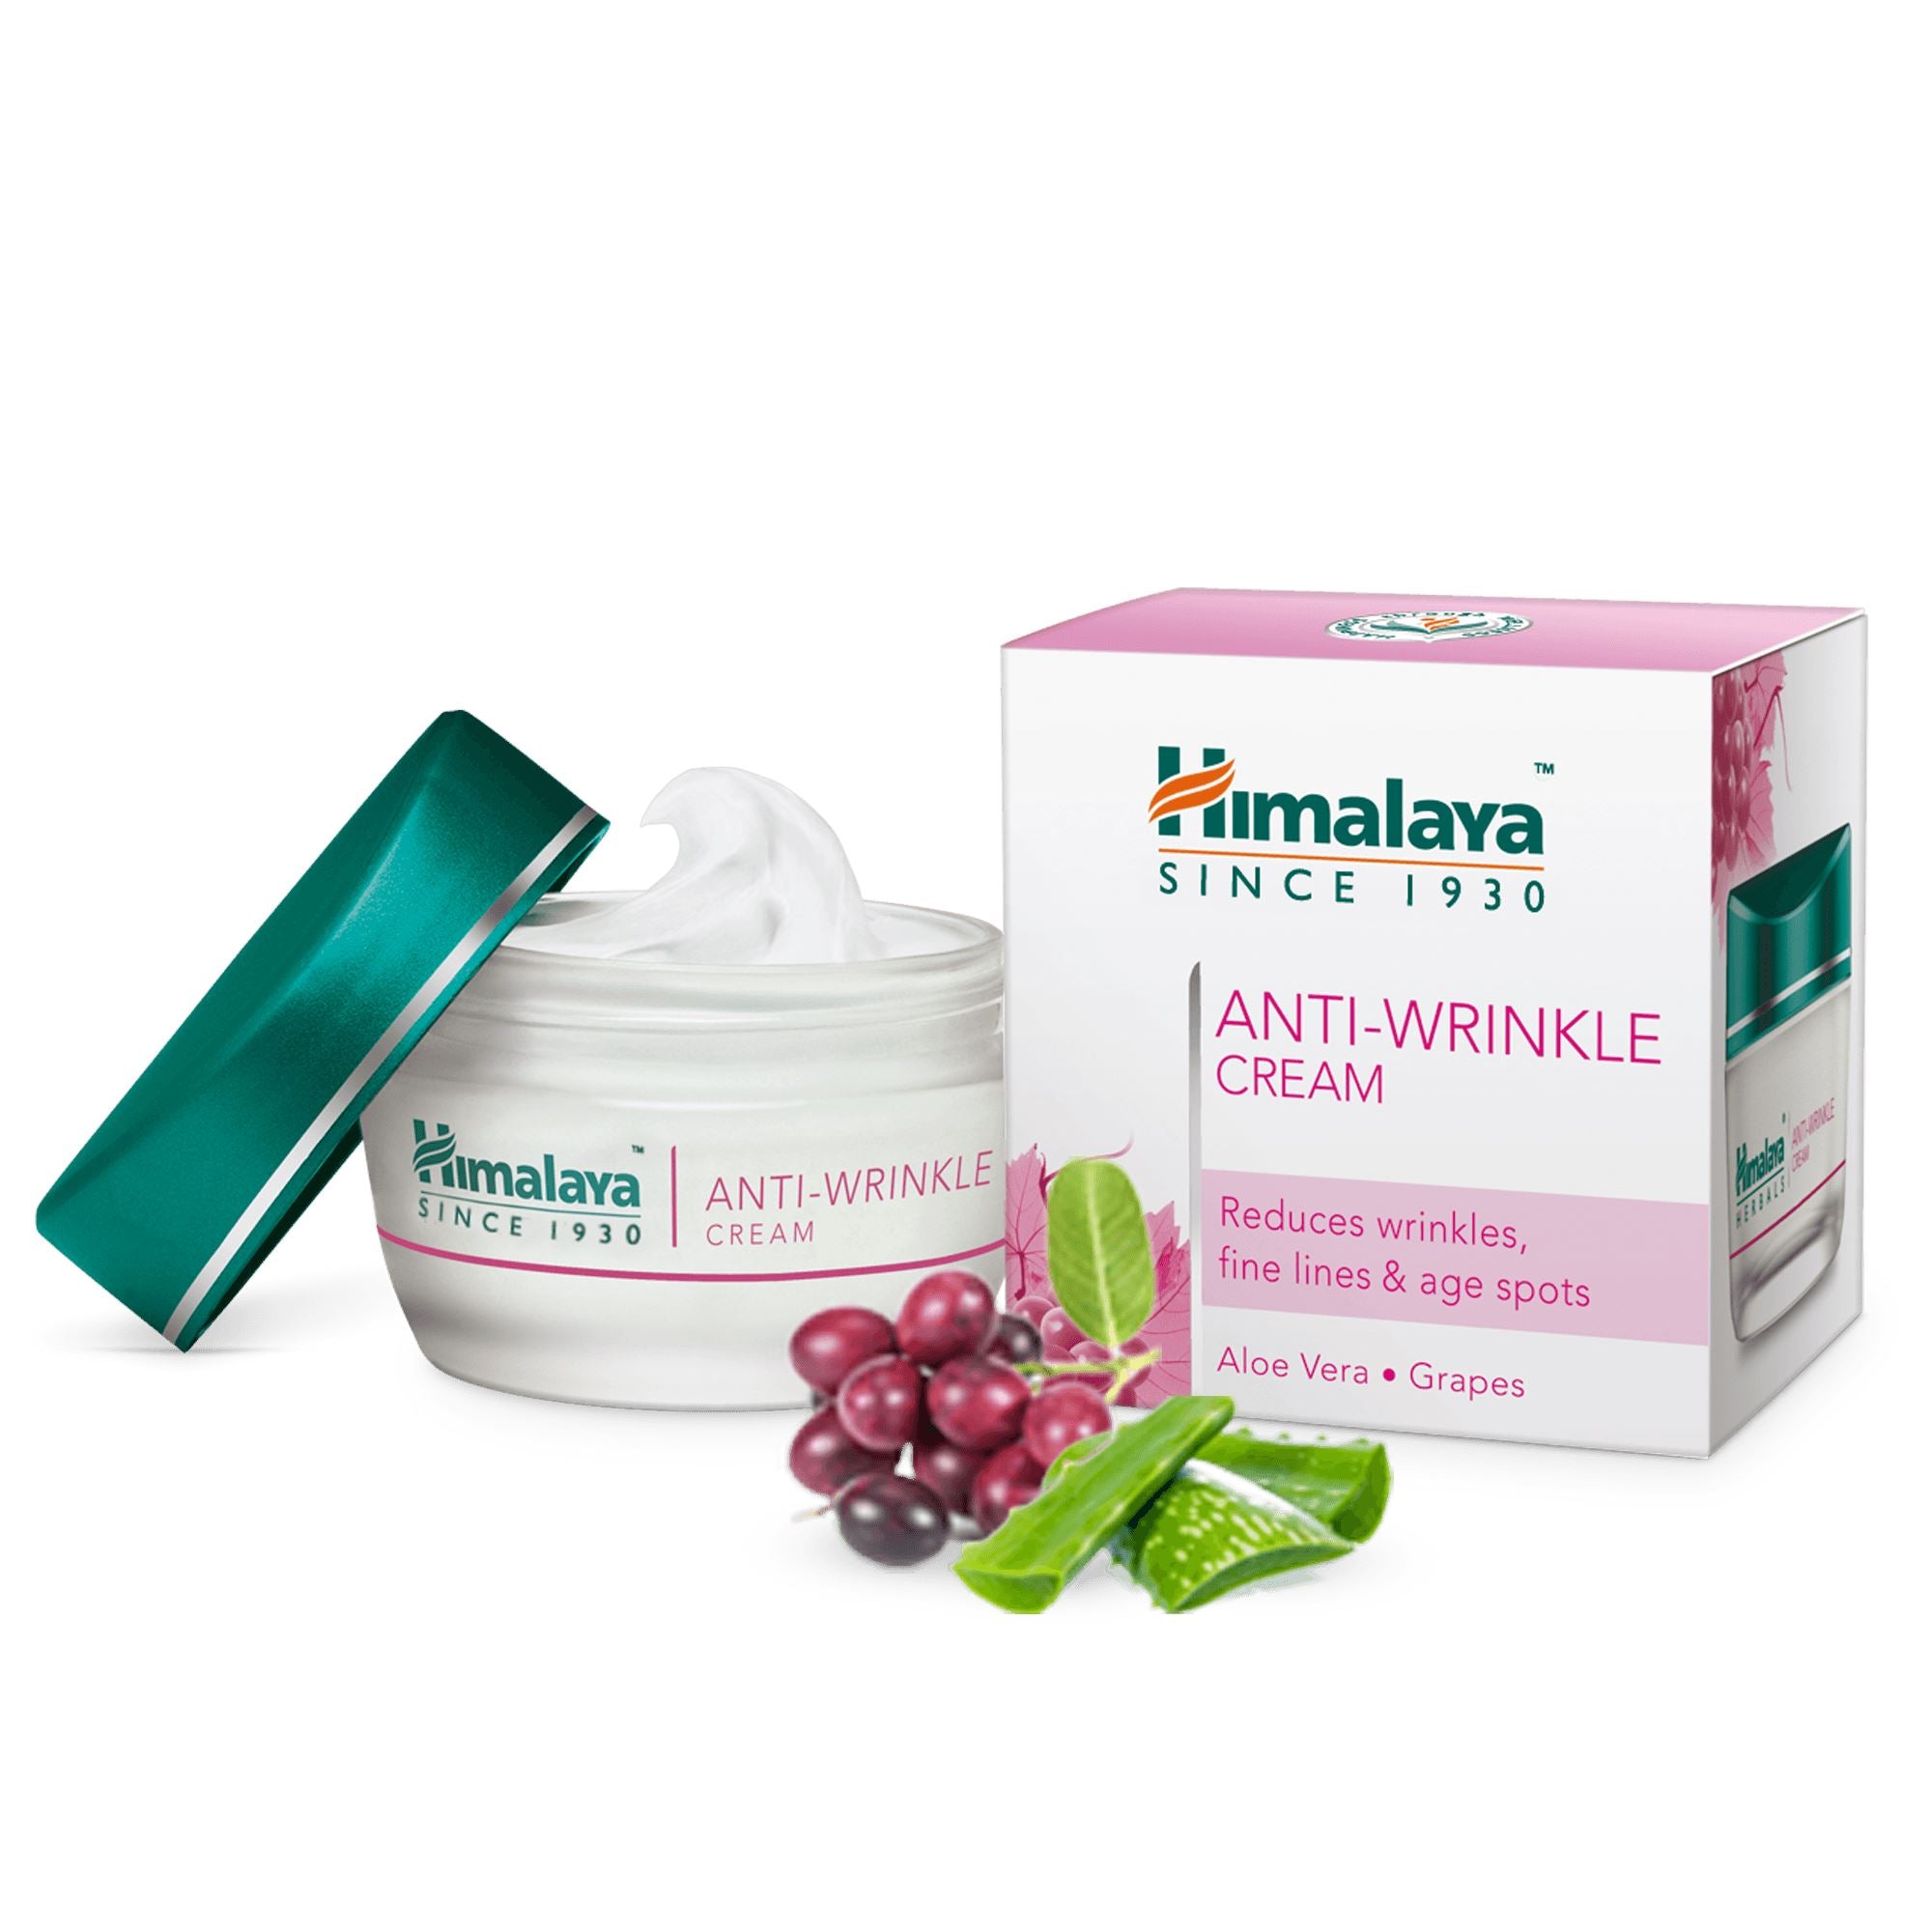 Himalaya Anti-Wrinkle Cream 50g - Reduces wrinkles, fine lines and skin roughness